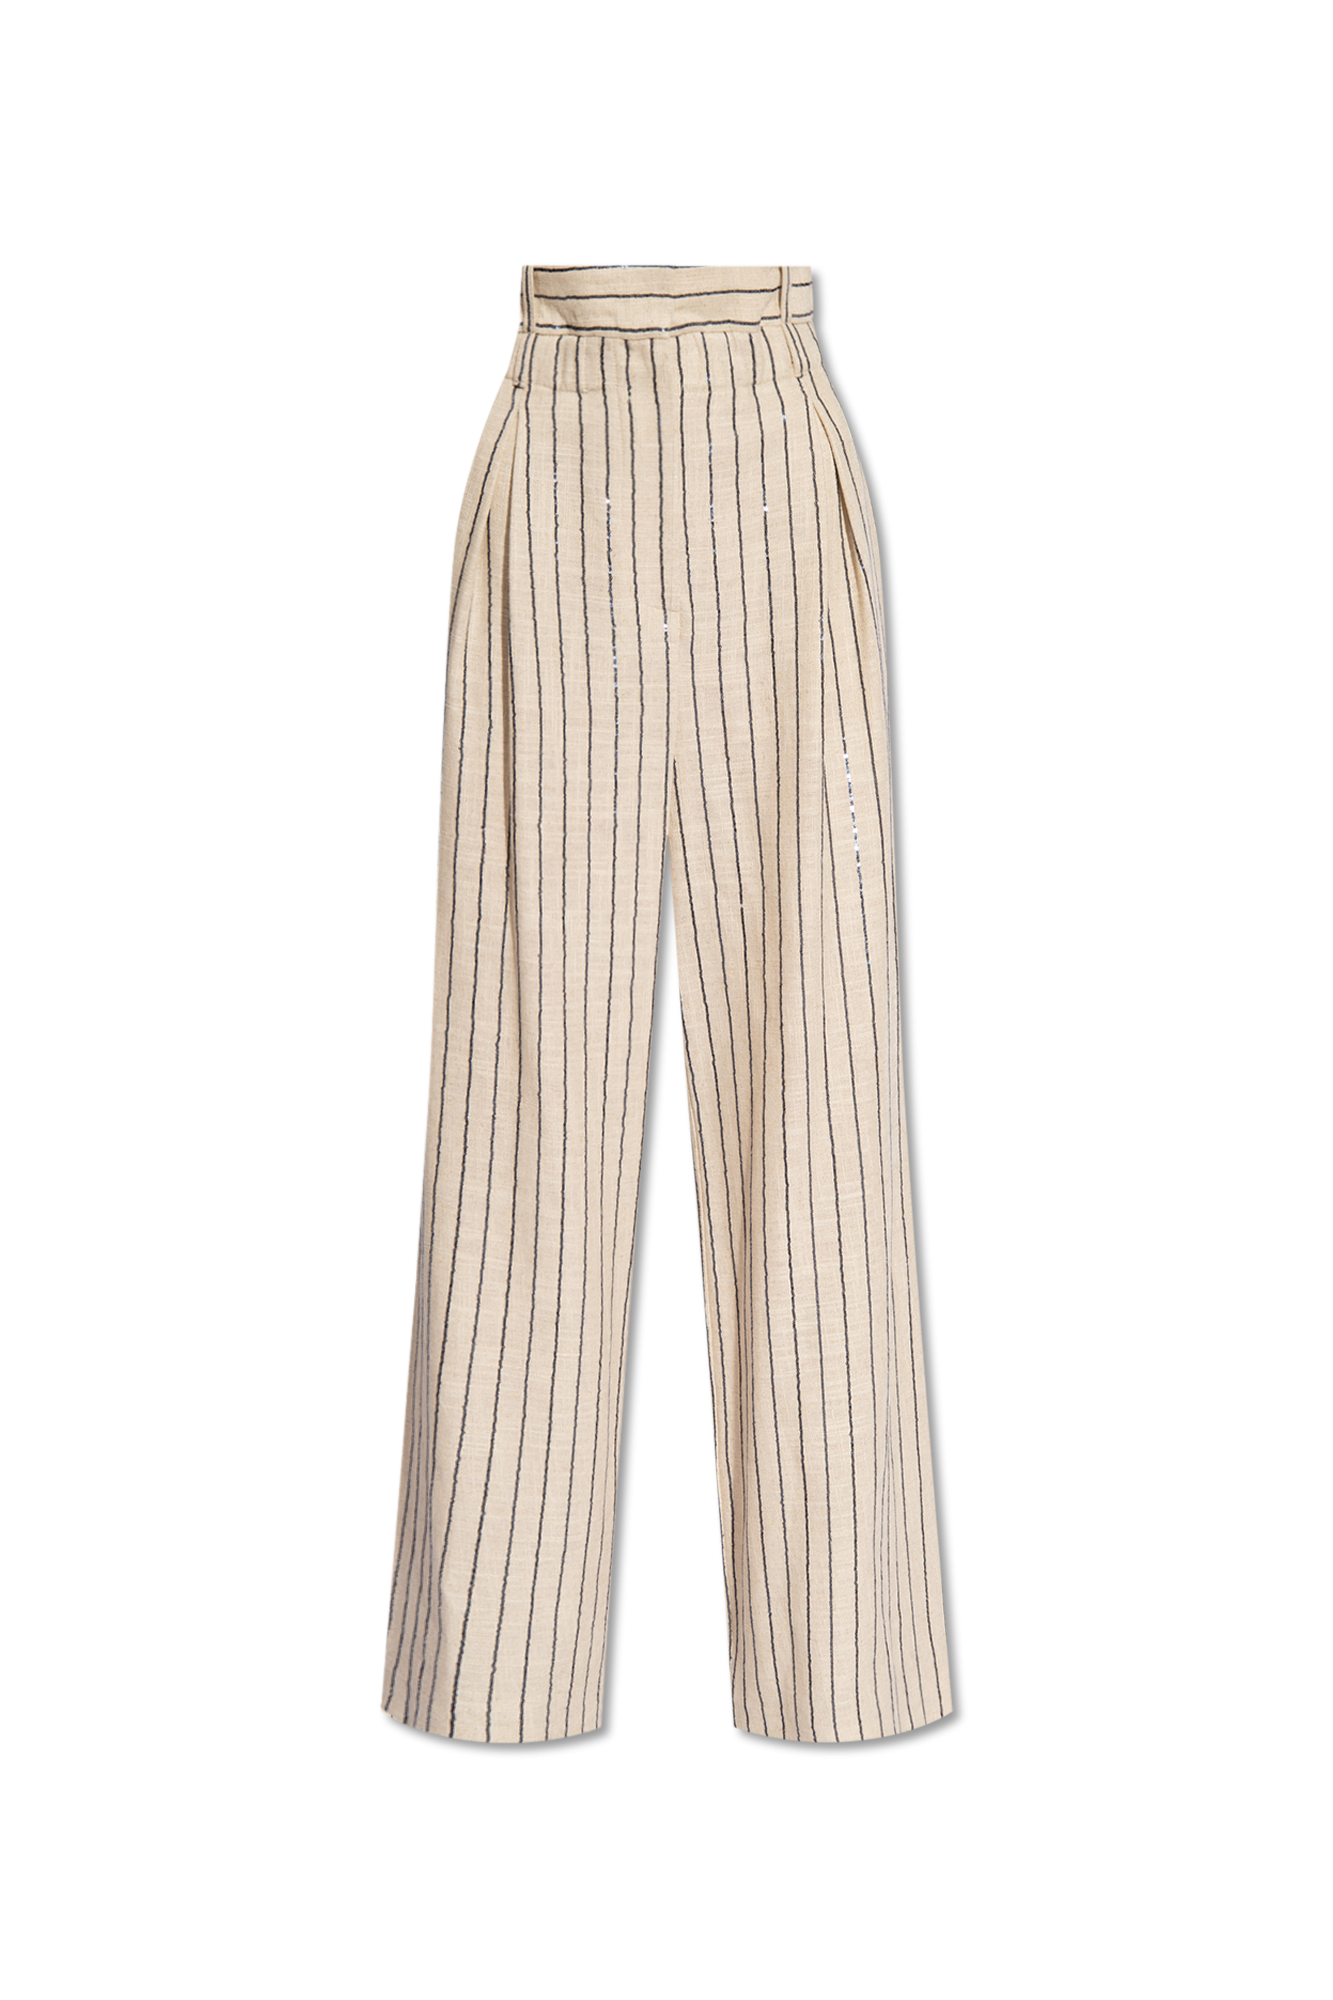 The Mannei ‘Ludvika’ 70s trousers